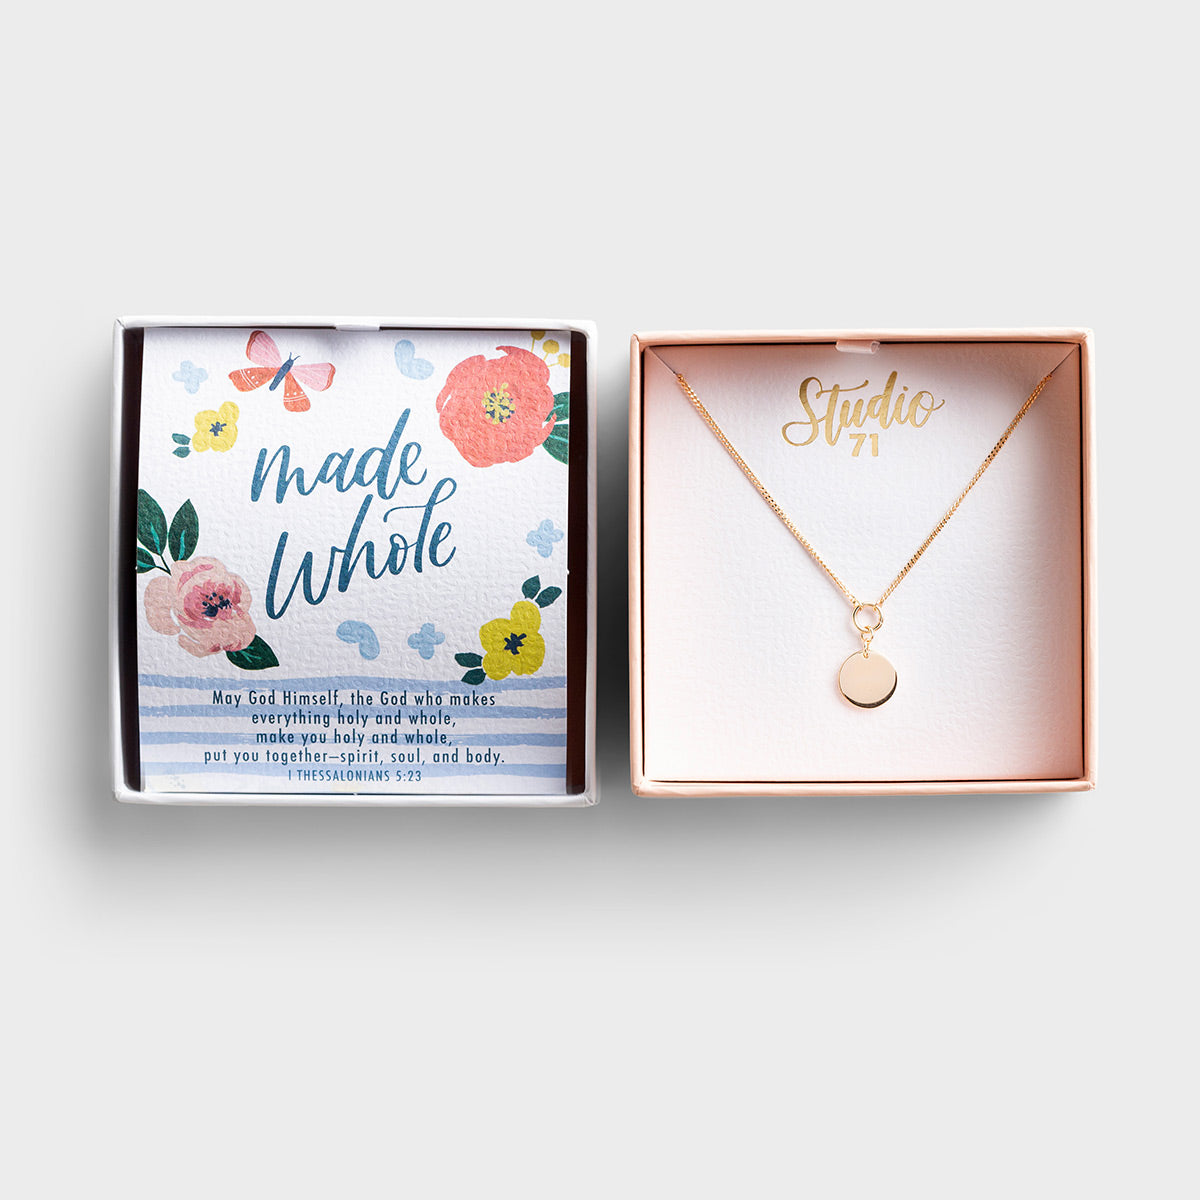 Image of Studio 71 - Made Whole - Gold Necklace & Inspirational Card other